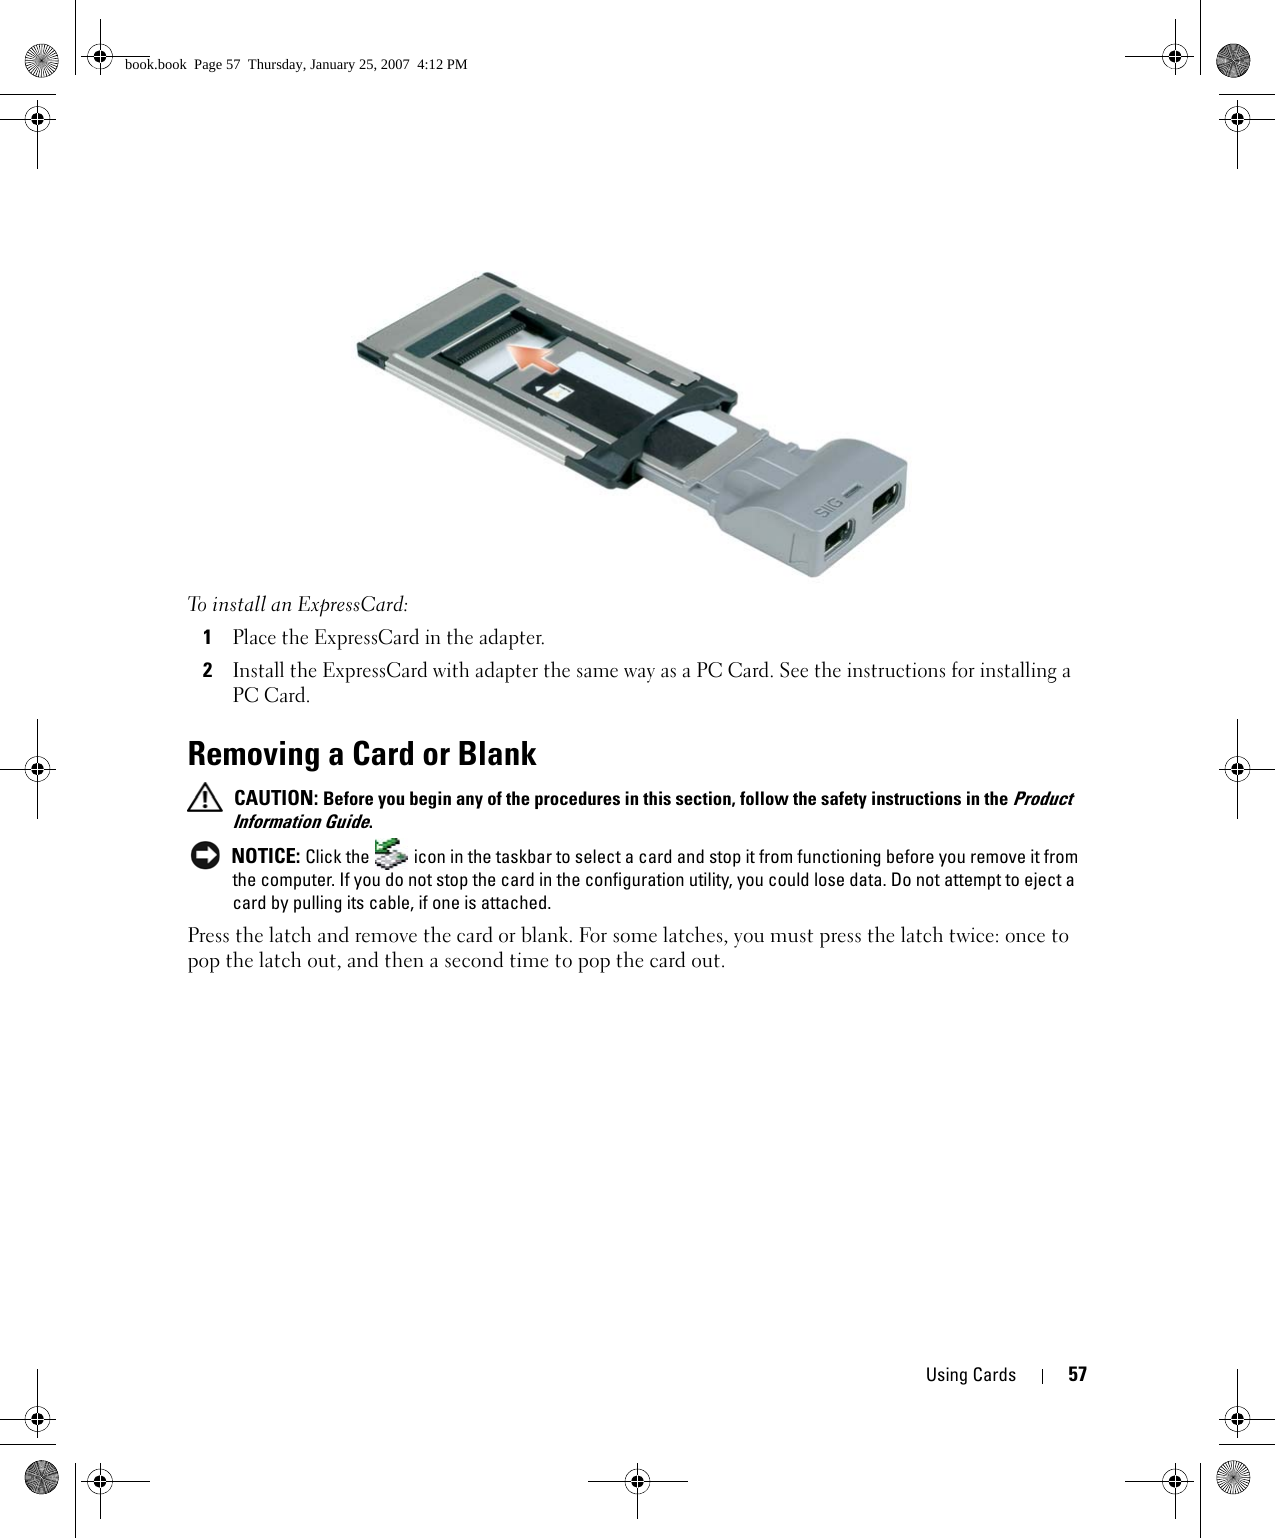 Using Cards 57To install an ExpressCard:1Place the ExpressCard in the adapter.2Install the ExpressCard with adapter the same way as a PC Card. See the instructions for installing a PC Card.Removing a Card or Blank CAUTION: Before you begin any of the procedures in this section, follow the safety instructions in the Product Information Guide. NOTICE: Click the   icon in the taskbar to select a card and stop it from functioning before you remove it from the computer. If you do not stop the card in the configuration utility, you could lose data. Do not attempt to eject a card by pulling its cable, if one is attached.Press the latch and remove the card or blank. For some latches, you must press the latch twice: once to pop the latch out, and then a second time to pop the card out.book.book  Page 57  Thursday, January 25, 2007  4:12 PM